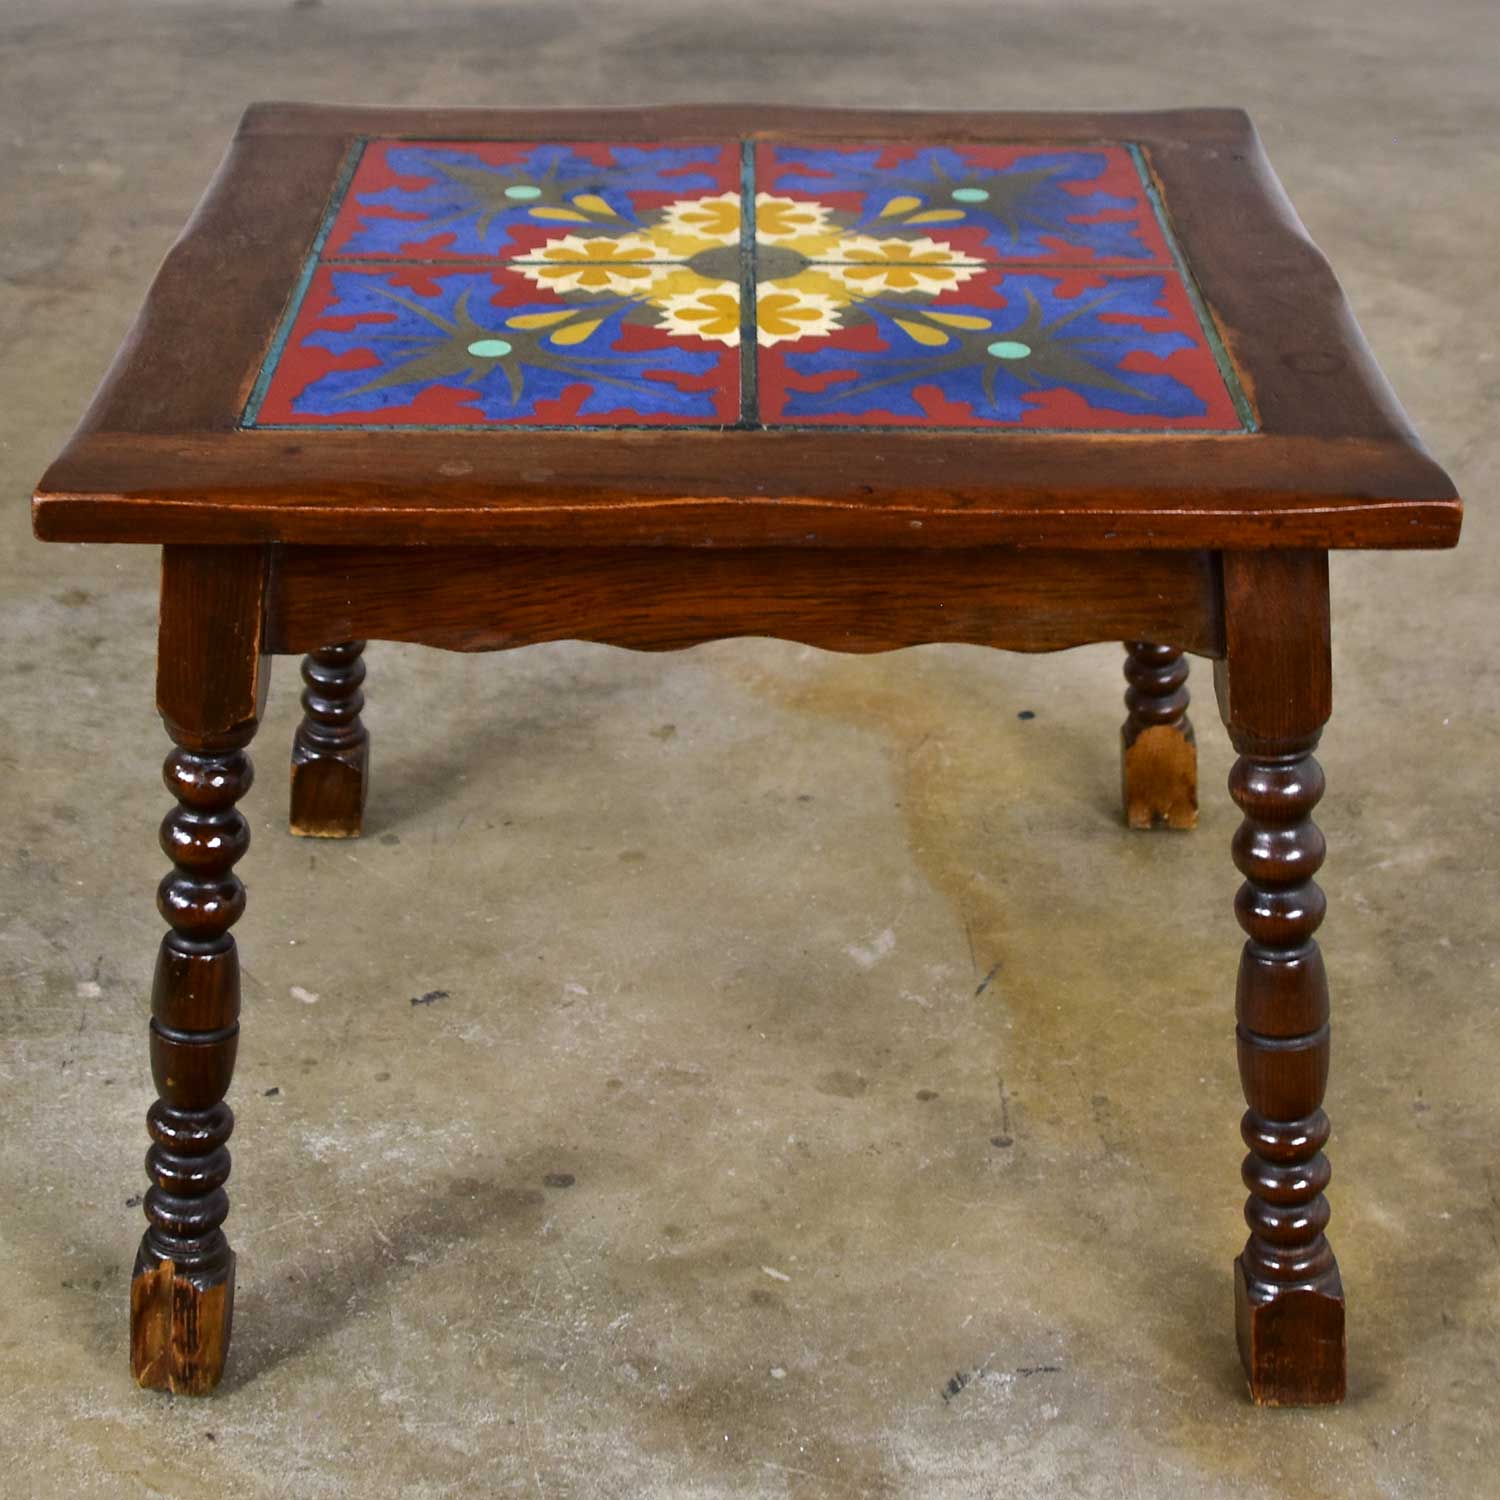 Catalina California Taylor or Mission Arts & Crafts Style Spanish Tile Top Side or End Table